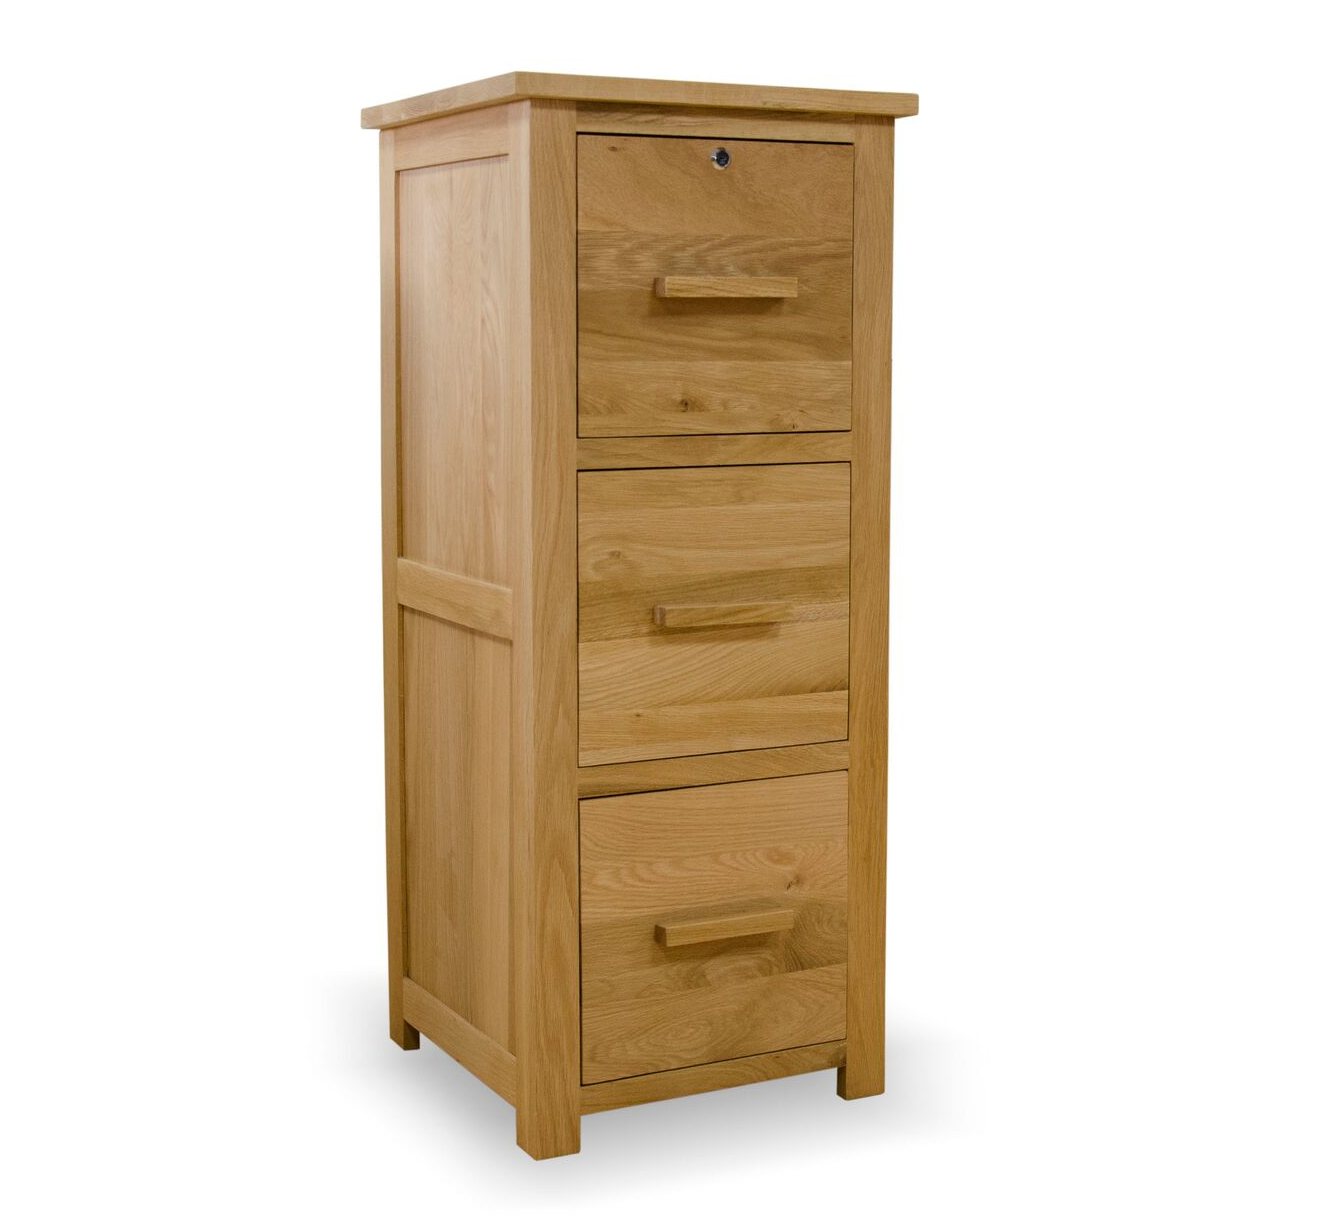 Homestyle Opus Light Oak 3 Drawer Filing Cabinet From The Sleep Station inside size 1317 X 1224